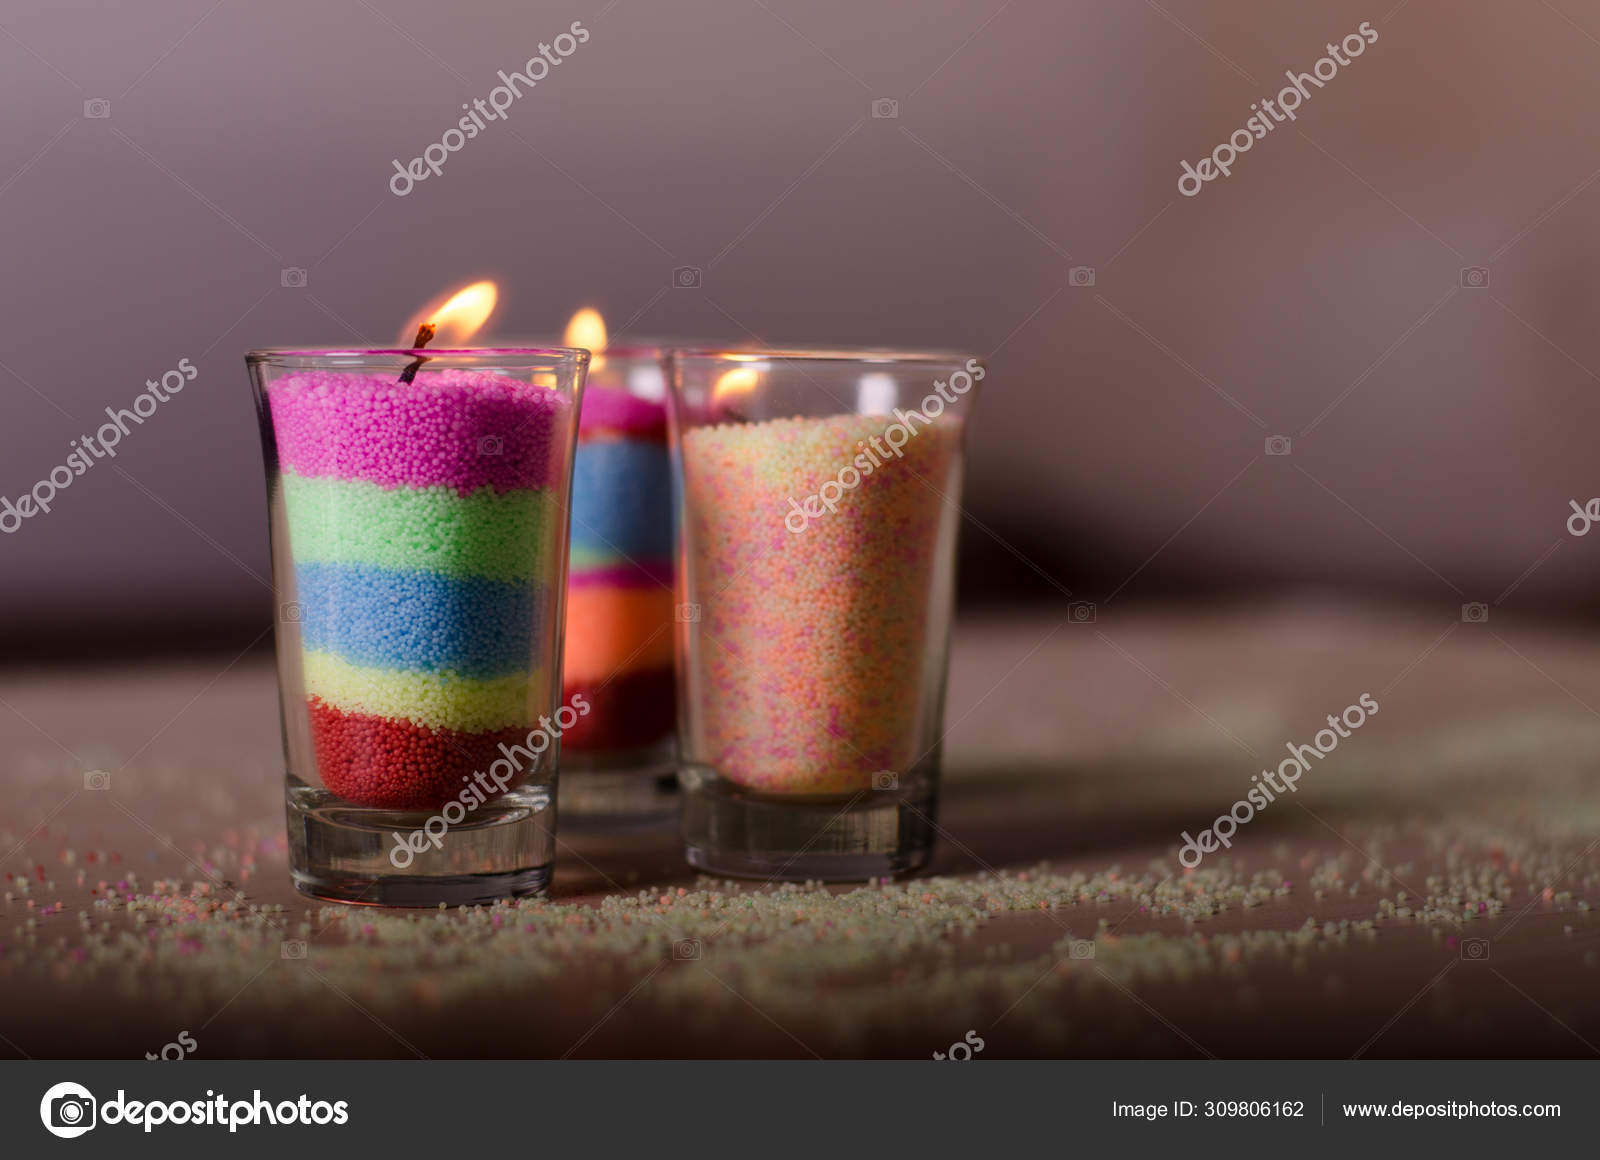 Homemade candles from colored granulated wax in a glasses. Stock